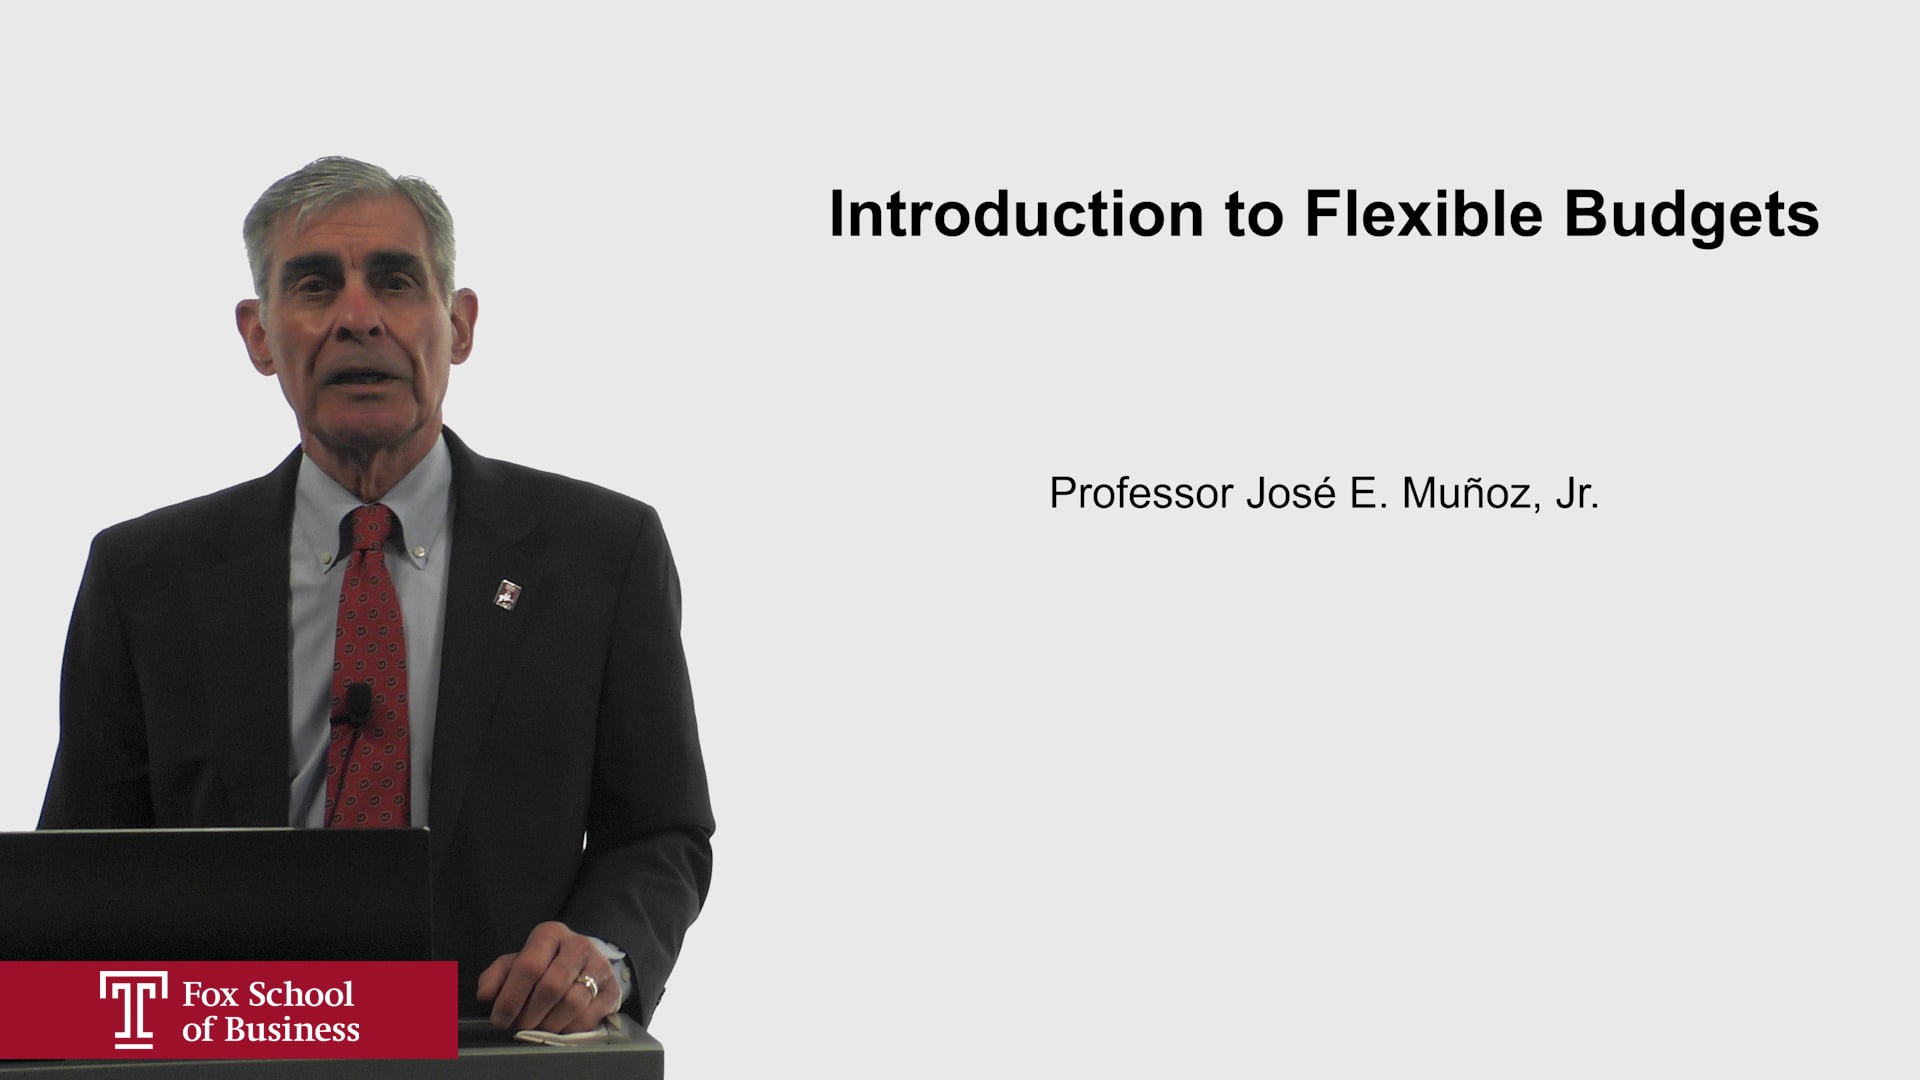 Introduction to Flexible Budgets